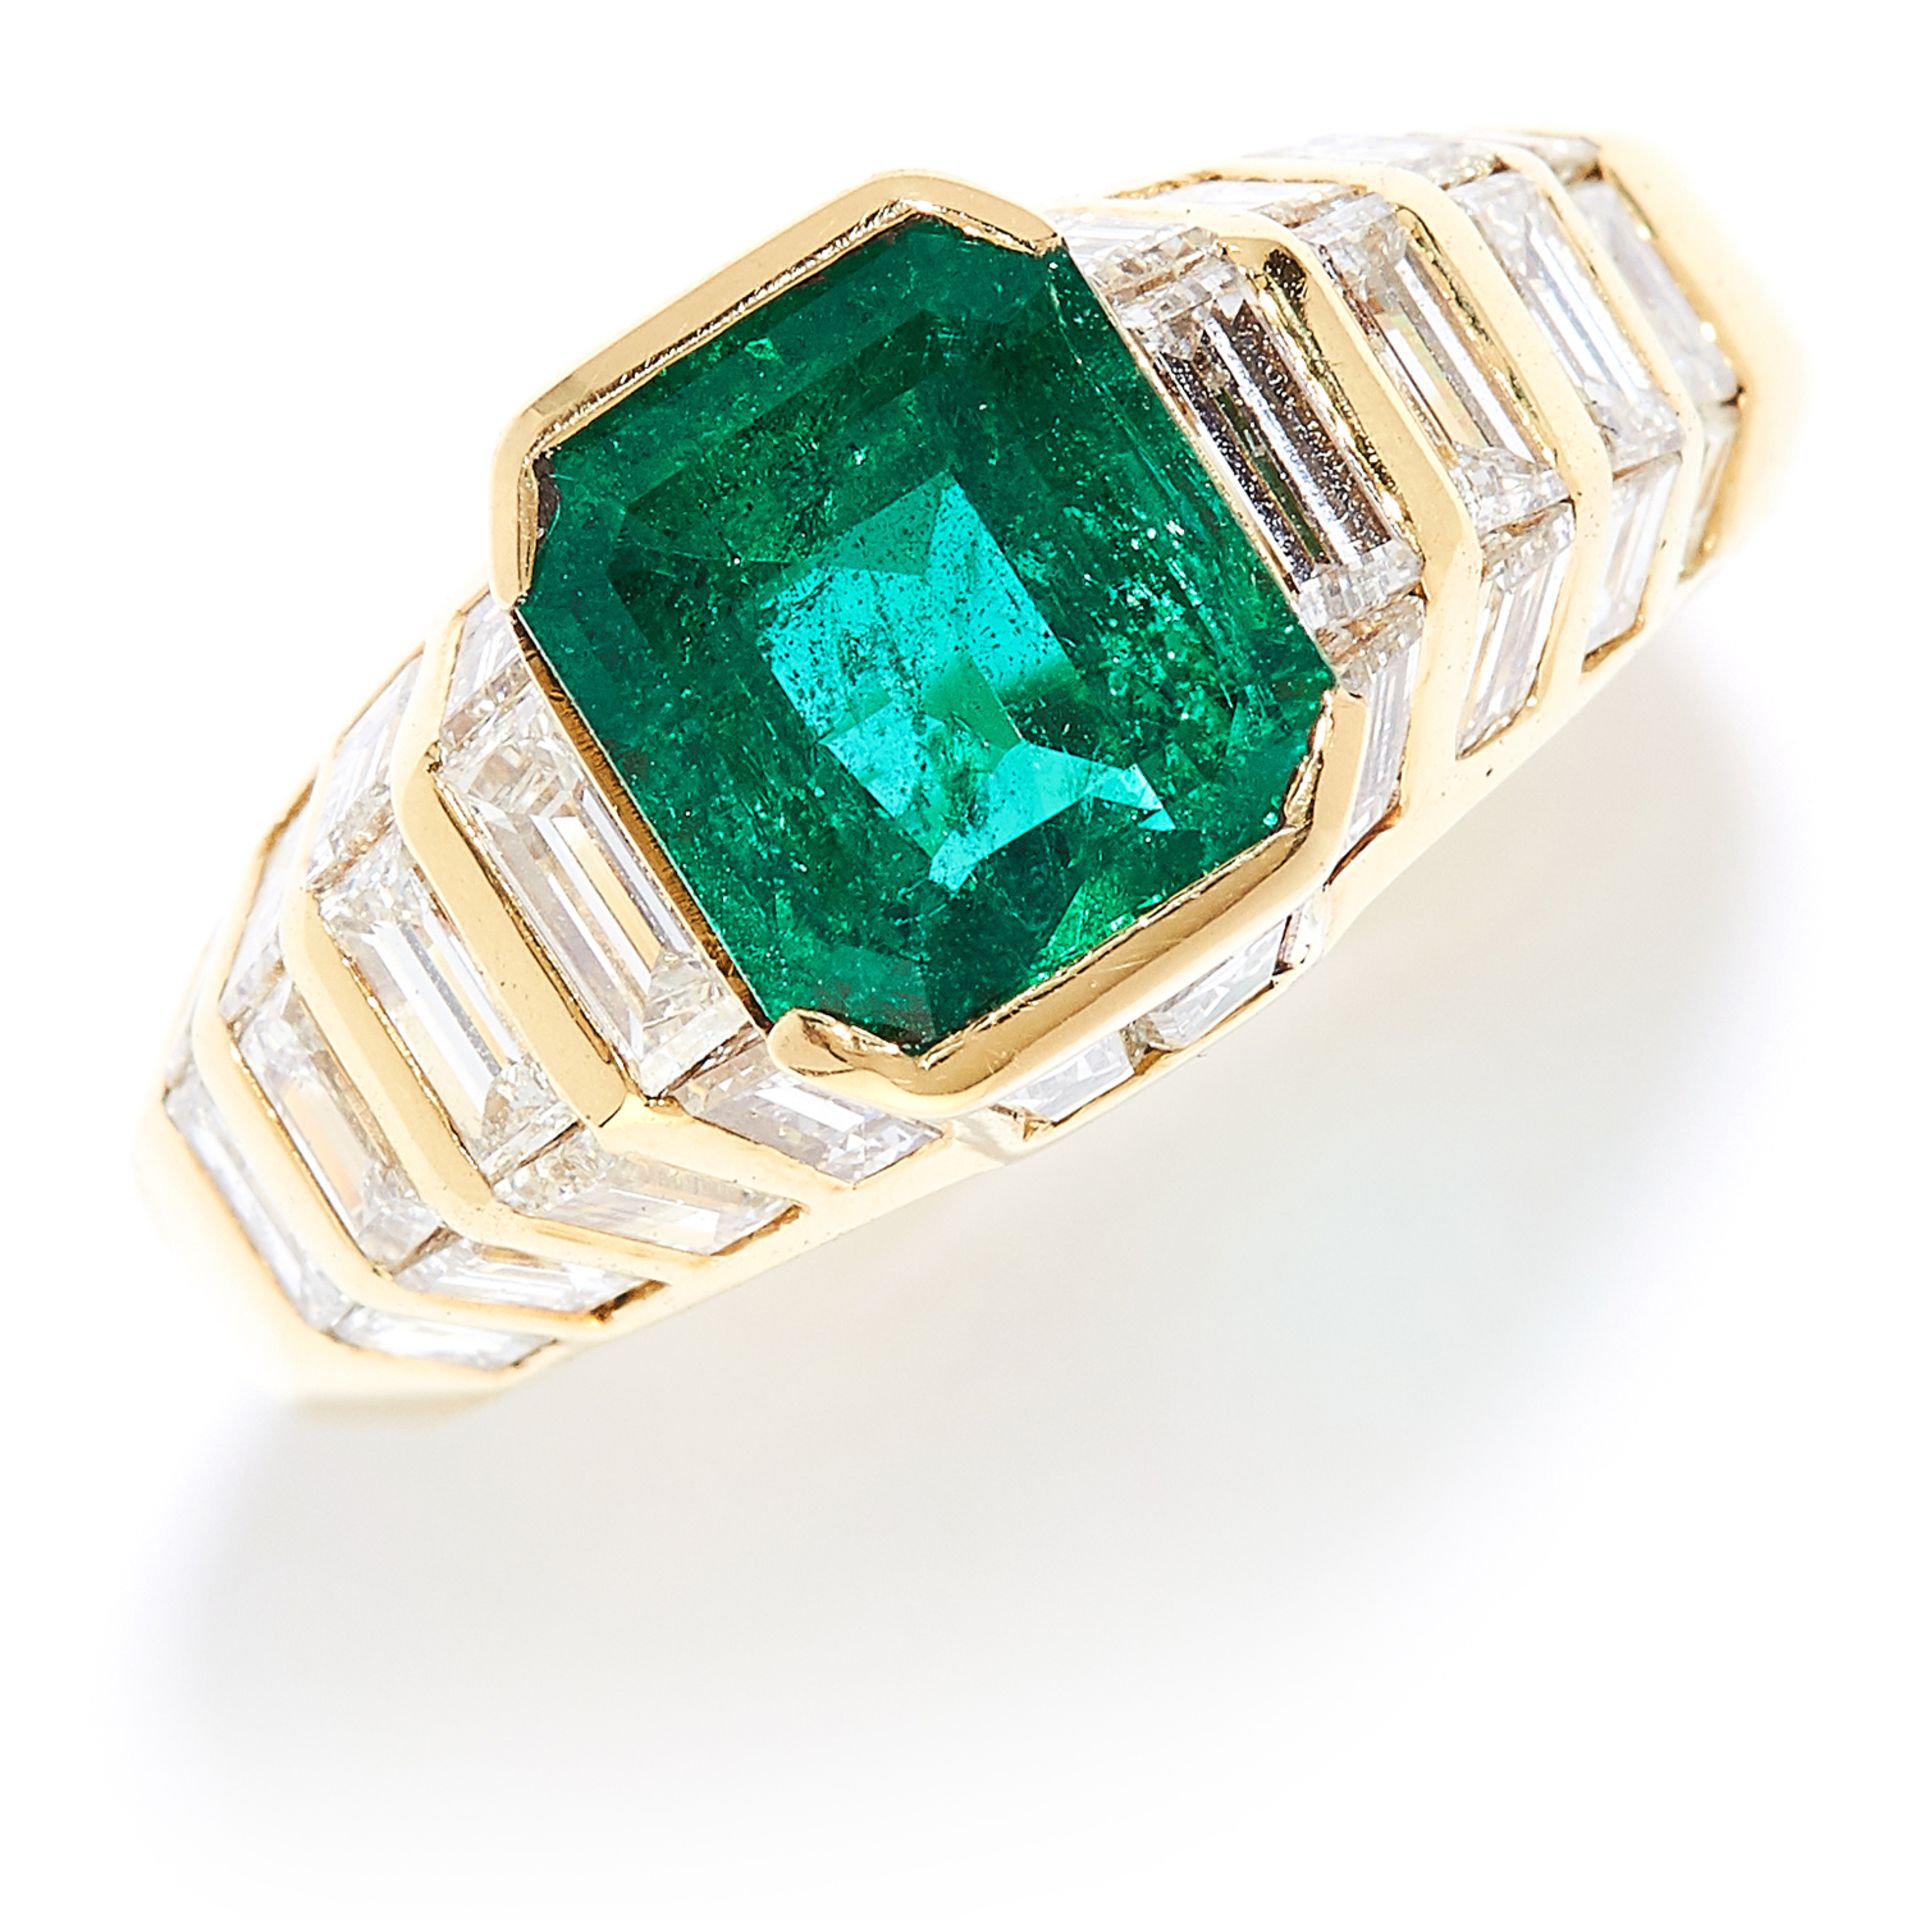 EMERALD AND DIAMOND DRESS RING in high carat yellow gold, set with an emerald cut emerald of 2.14